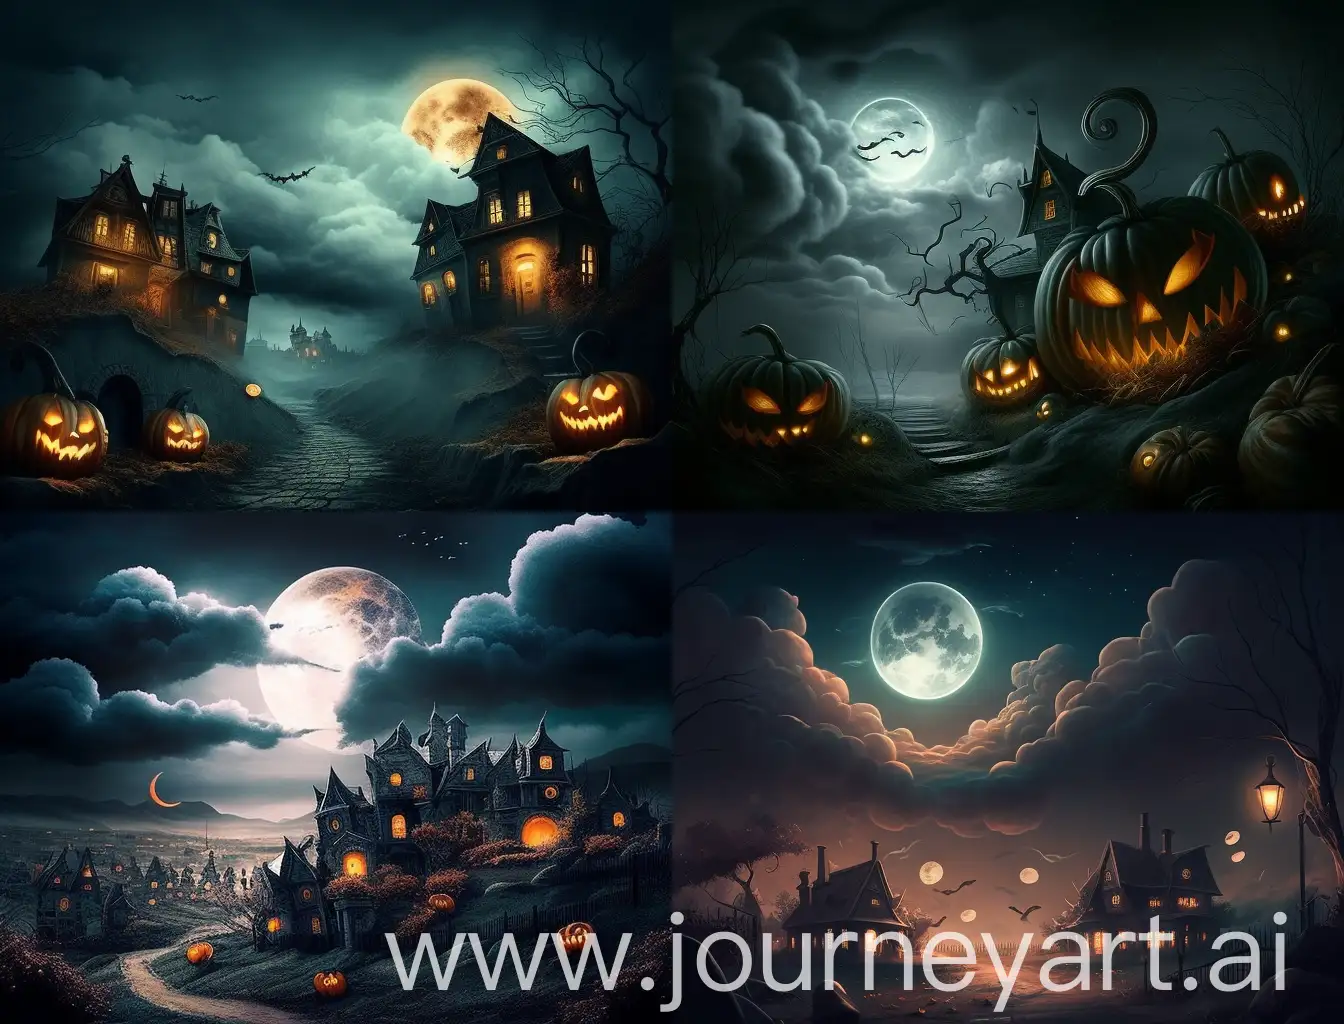 Eerie-Halloween-Town-Night-Scene-with-Pumpkin-Patch-and-Ghostly-Clouds